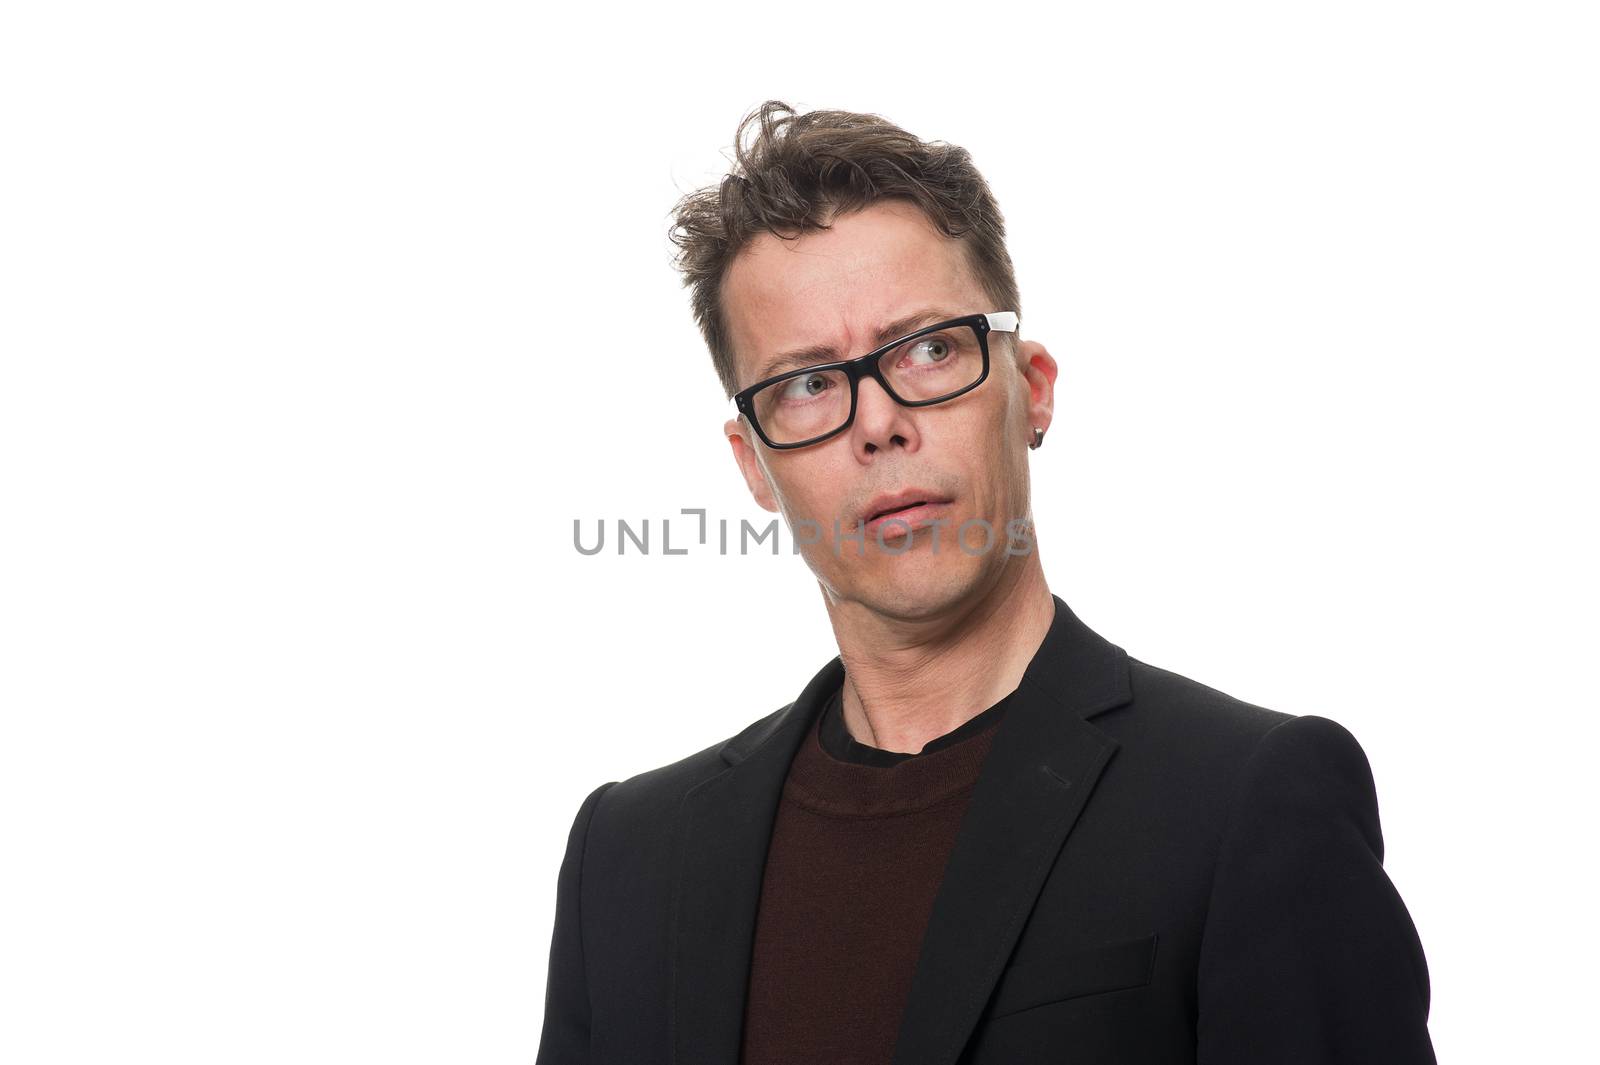 Close up Thoughtful Businessman with Eyeglasses Looking into Distance Seriously Against White Background, Emphasizing Confused Facial Expression.